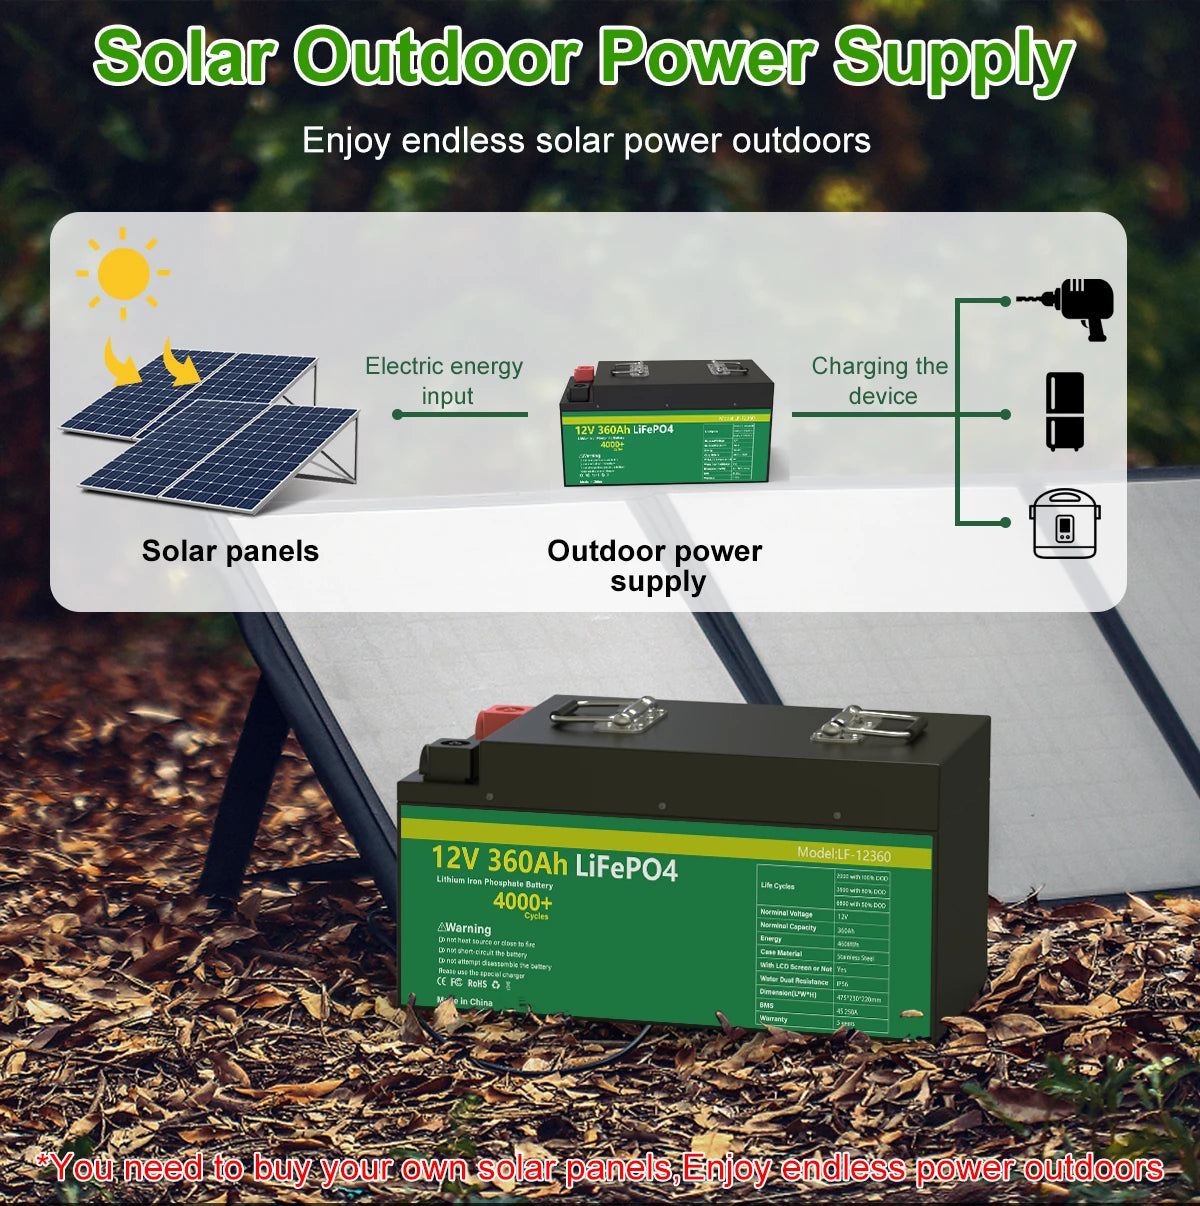 Outdoor power supply for solar panels: rechargeable LiFePo4 battery pack with built-in BMS.